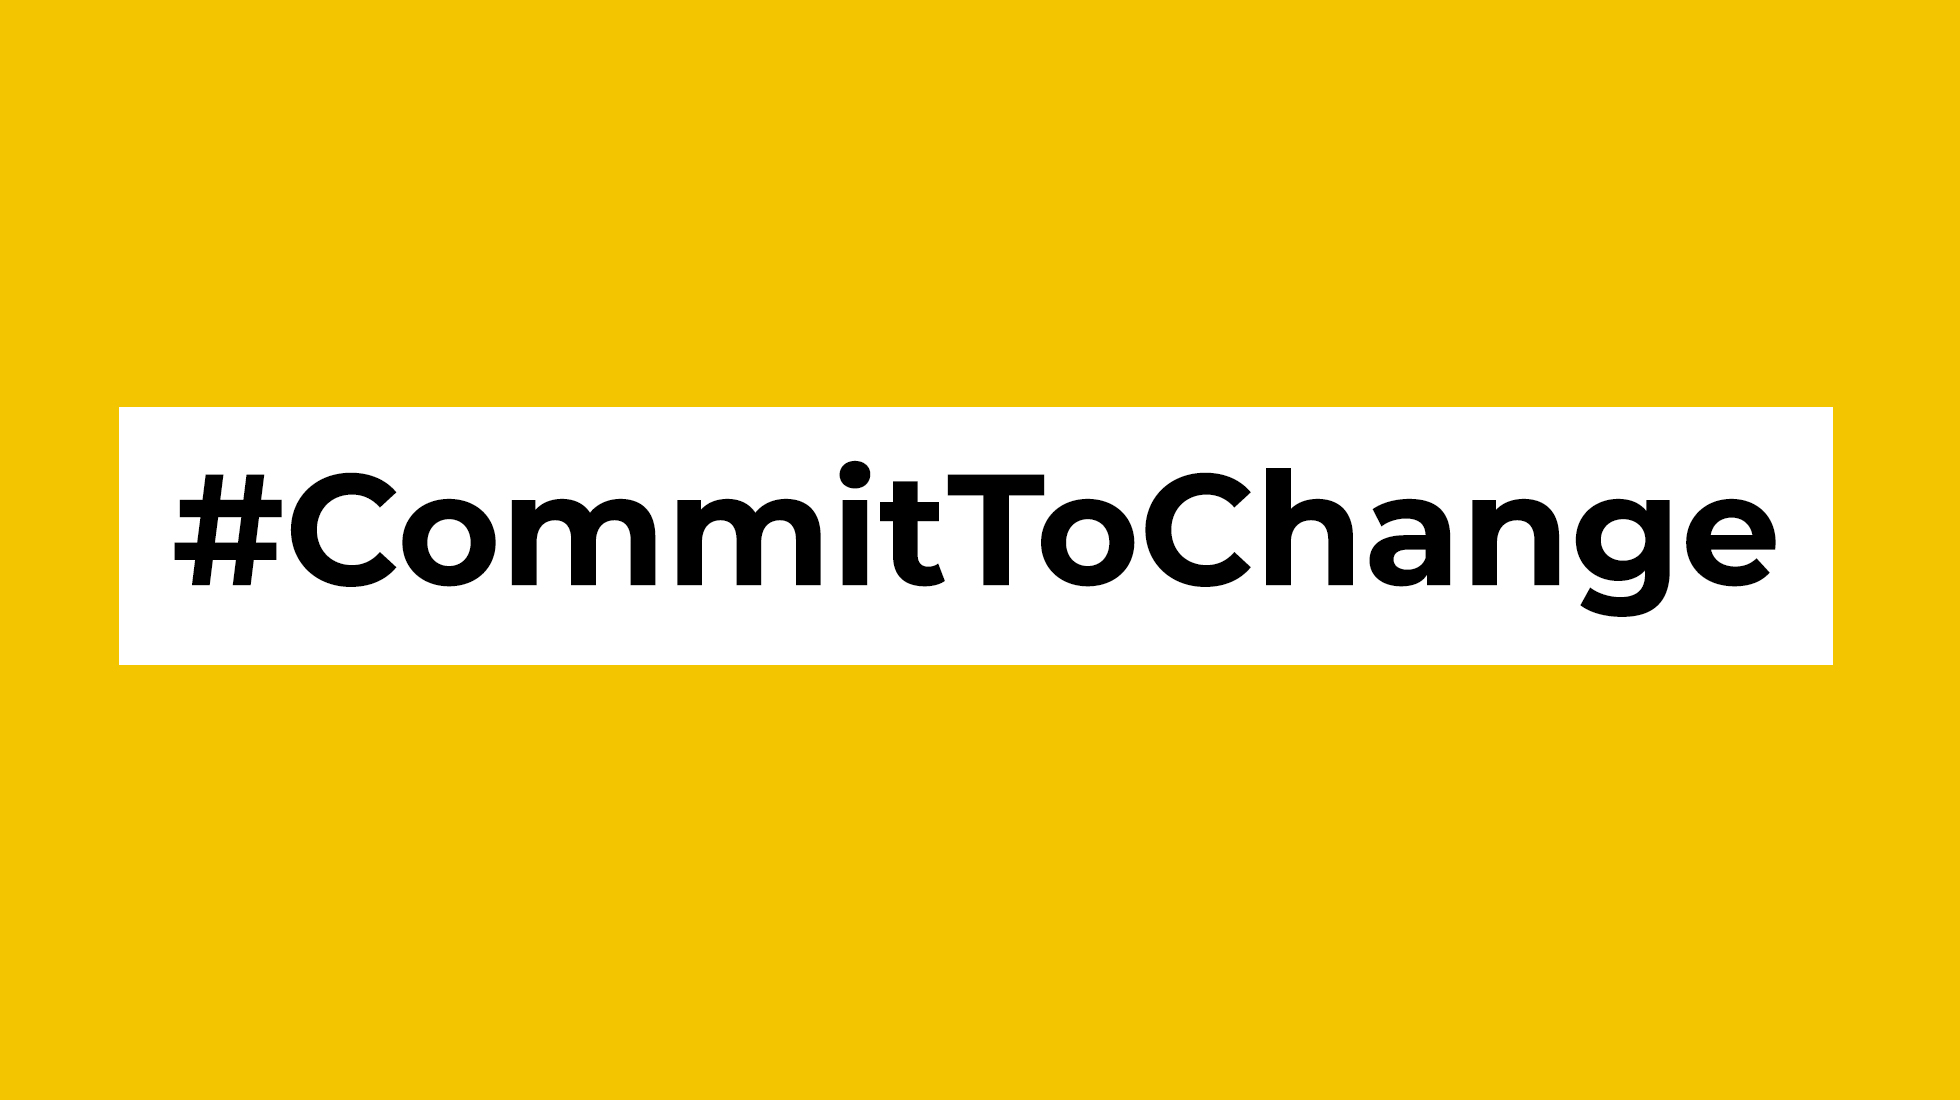 Commit to change